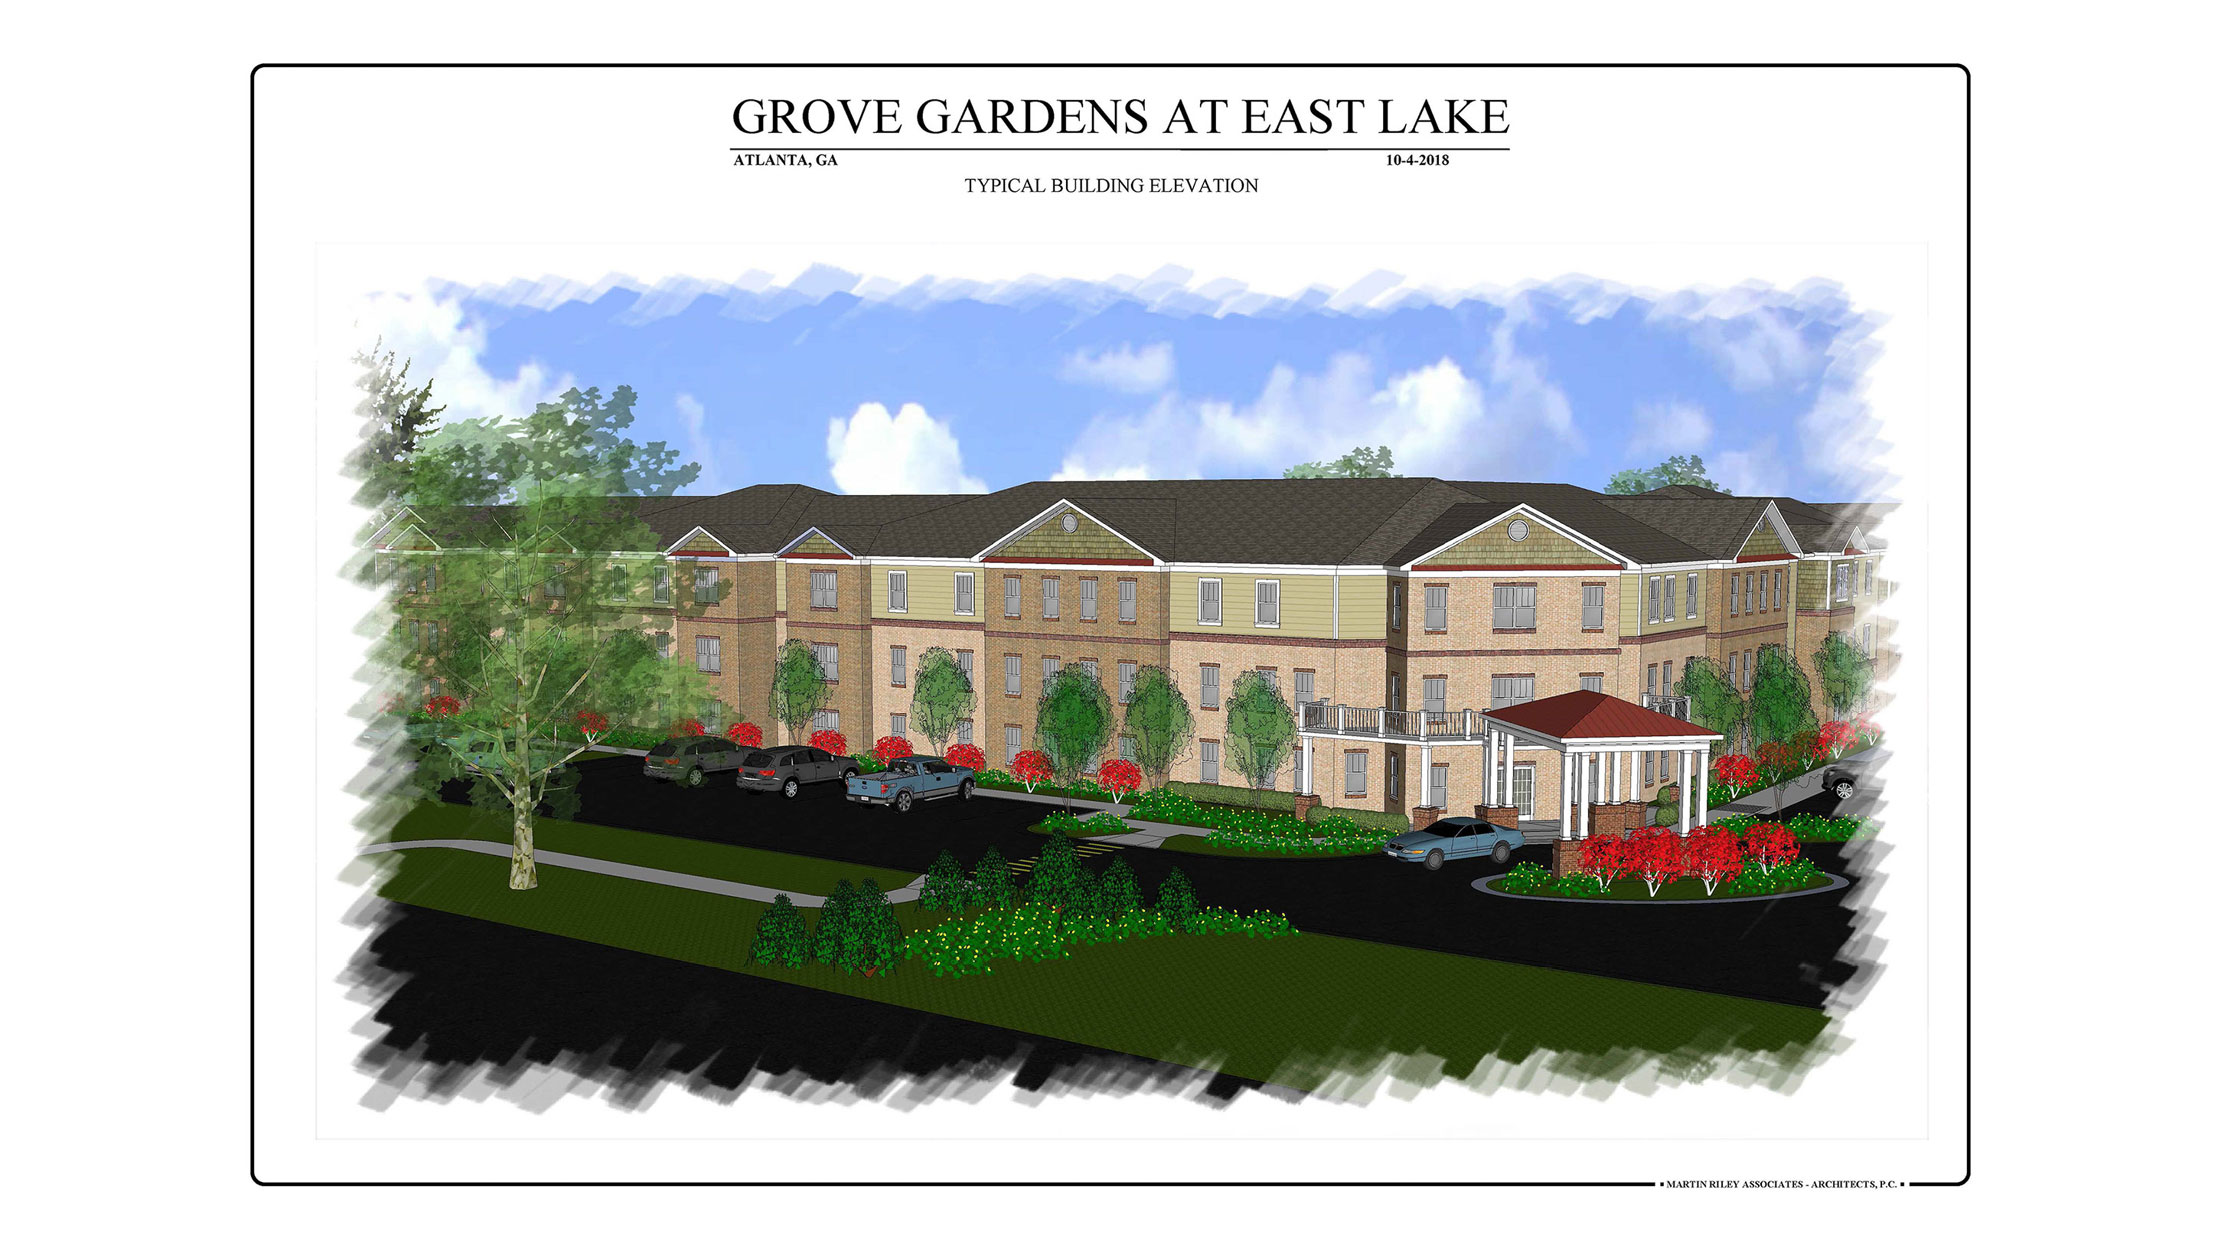 On October 19, 2018, Fairway Construction broke ground on Grove Gardens at East Lake, an affordable senior housing community to be built in Atlanta, Georgia.